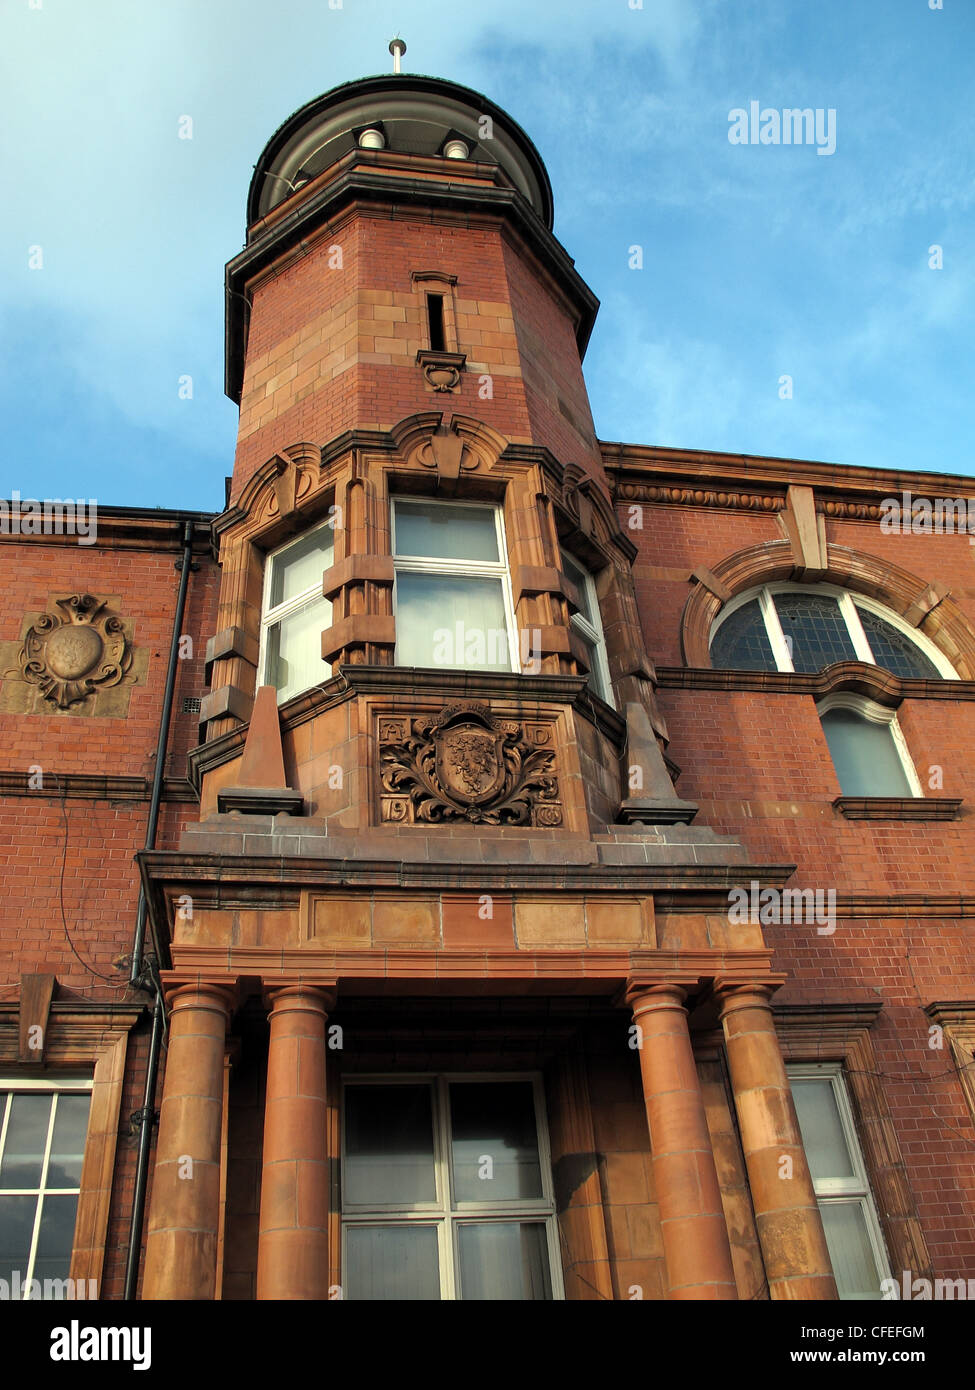 Warrington Police Headquarters Building showing tower in red stonework, Cheshire Constabulary Force Stock Photo